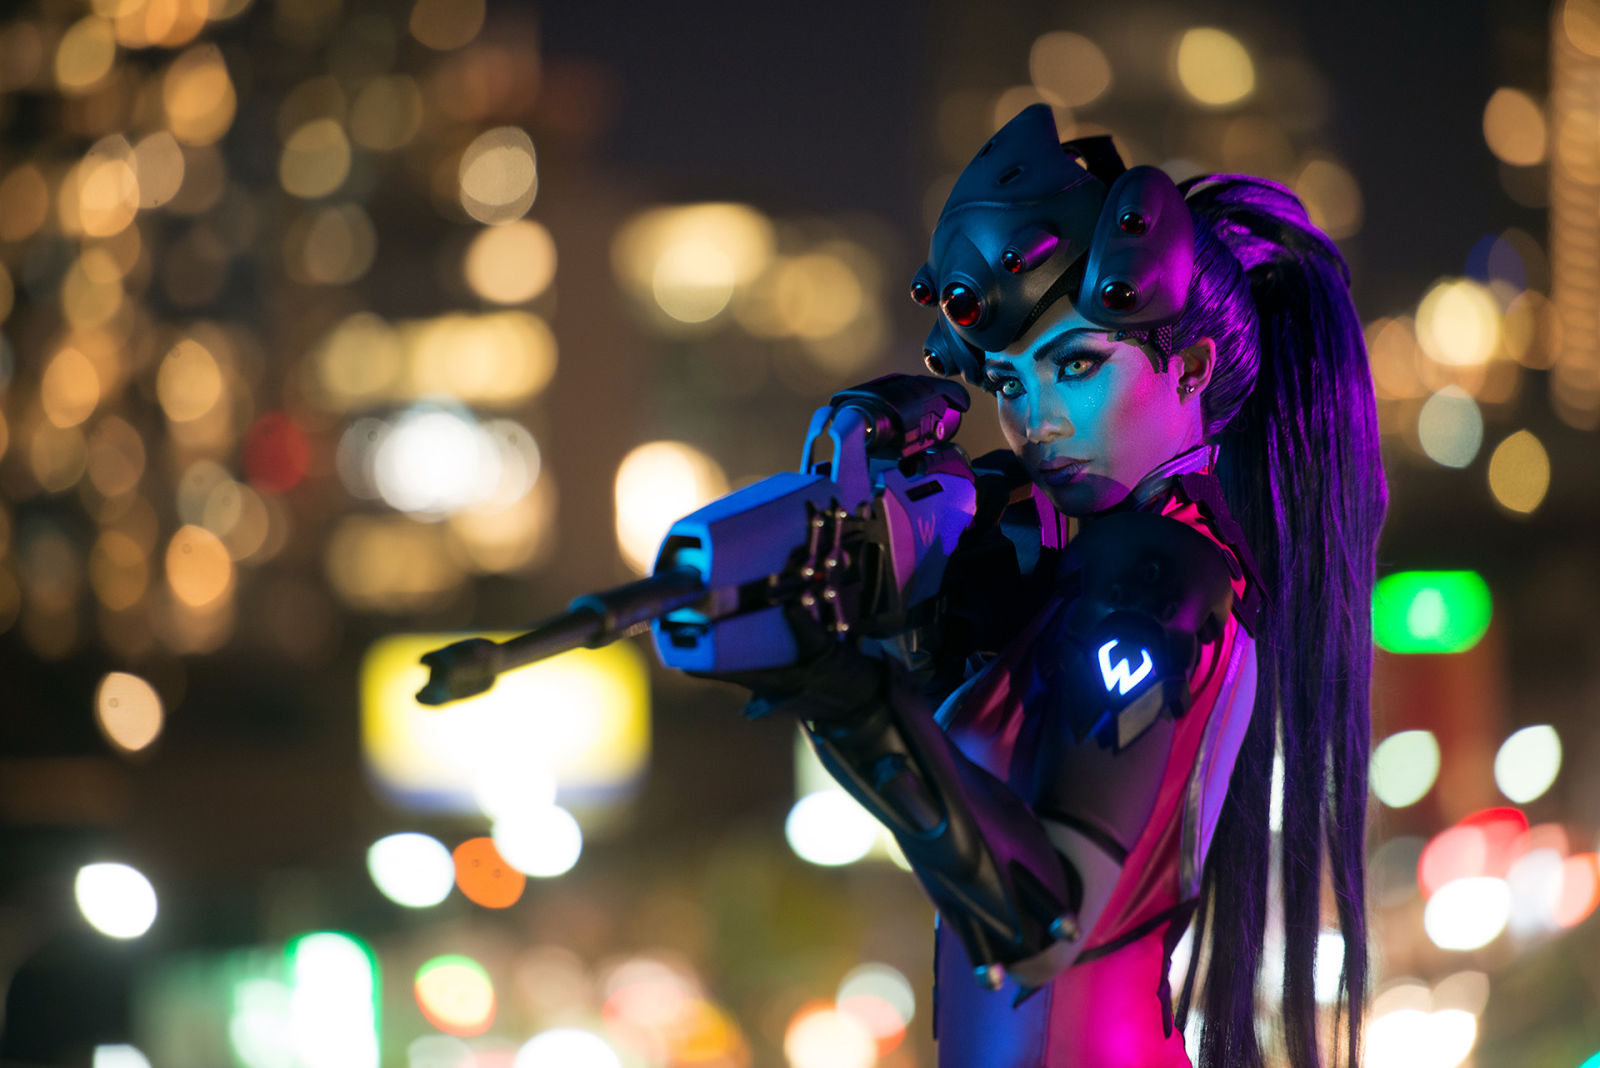 Overwatch: 10 Widowmaker Cosplays You Need To Get Into Your Sights